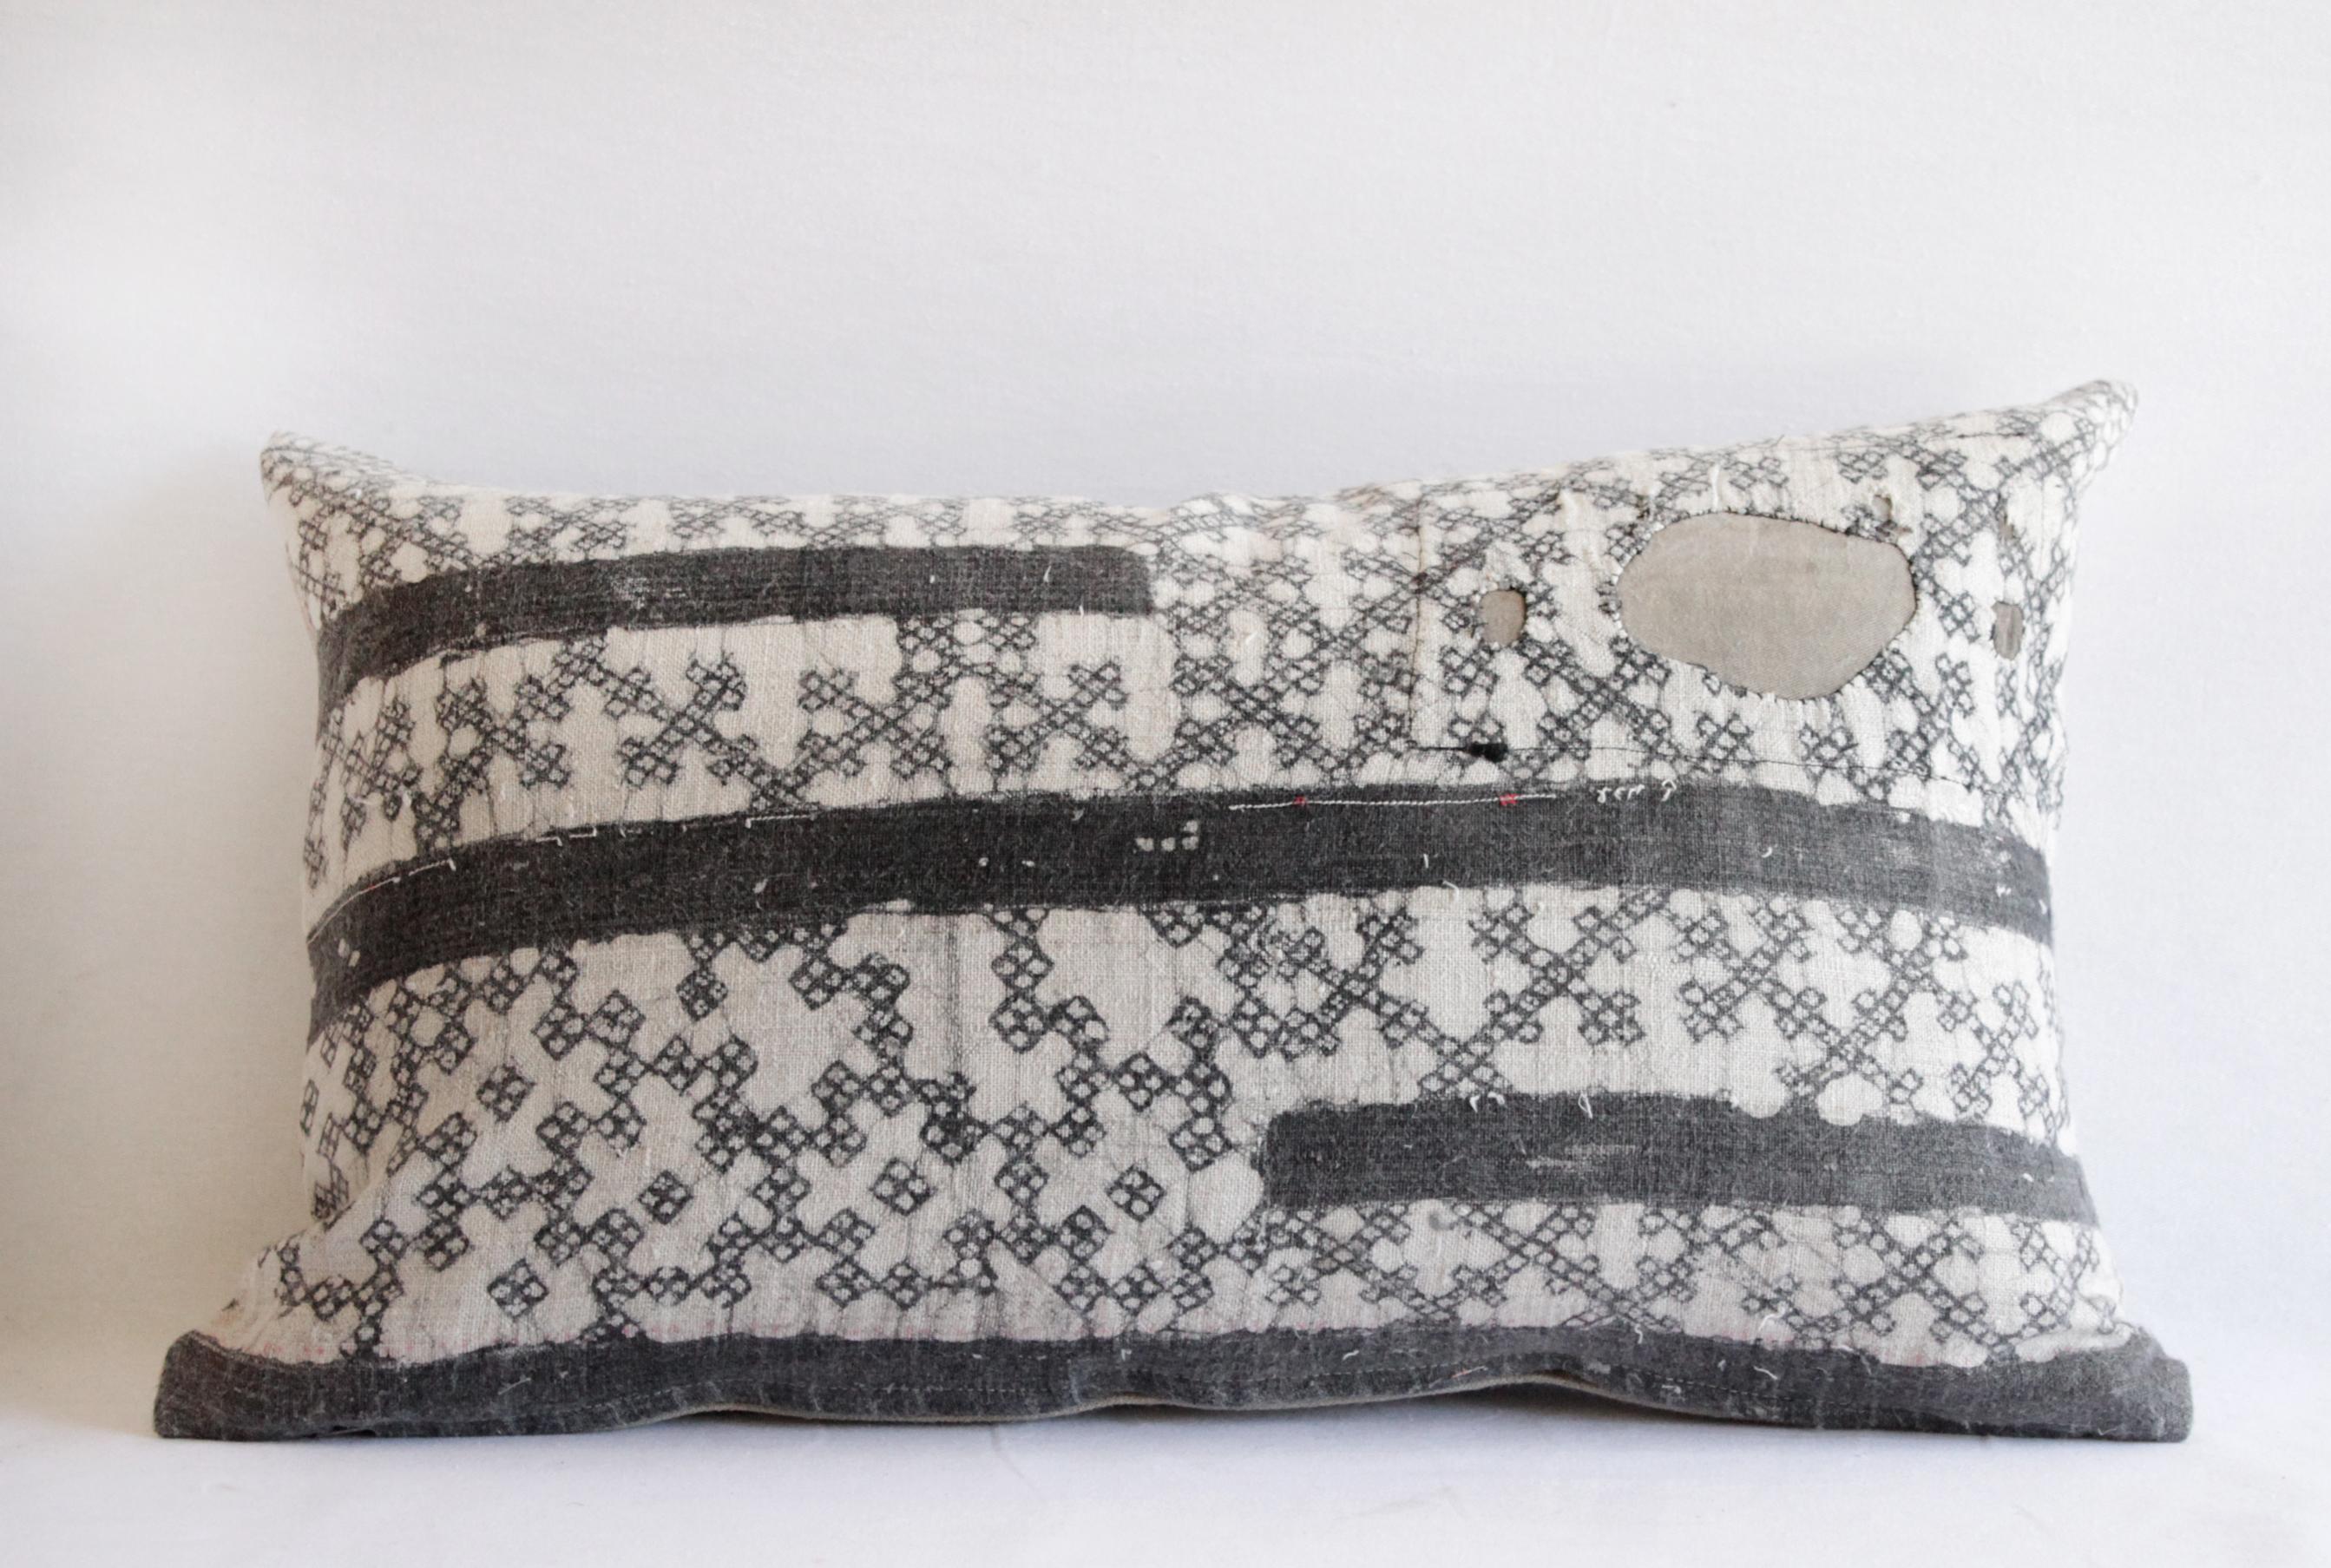 Vintage Batik accent pillow charcoal and natural linen 
This is a beautiful vintage textile piece we have created into a pillow. The front side is a linen weave, light natural color background with a darker charcoal grey (faded black) batik